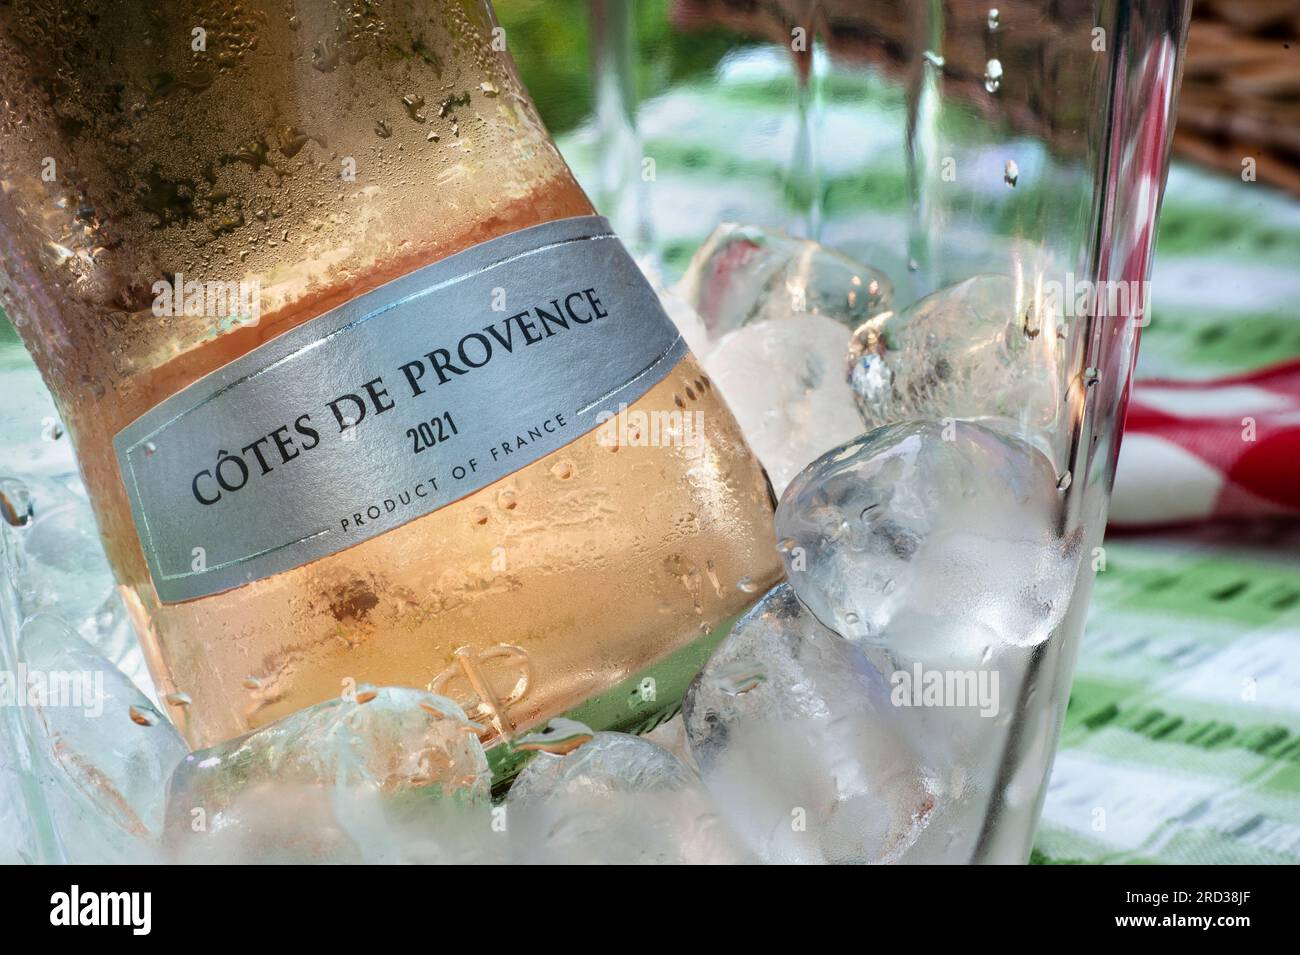 Cotes de Provence French Rosé 2021 wine bottle with label on ice in wine chiller cooler on alfresco outdoor picnic table Stock Photo